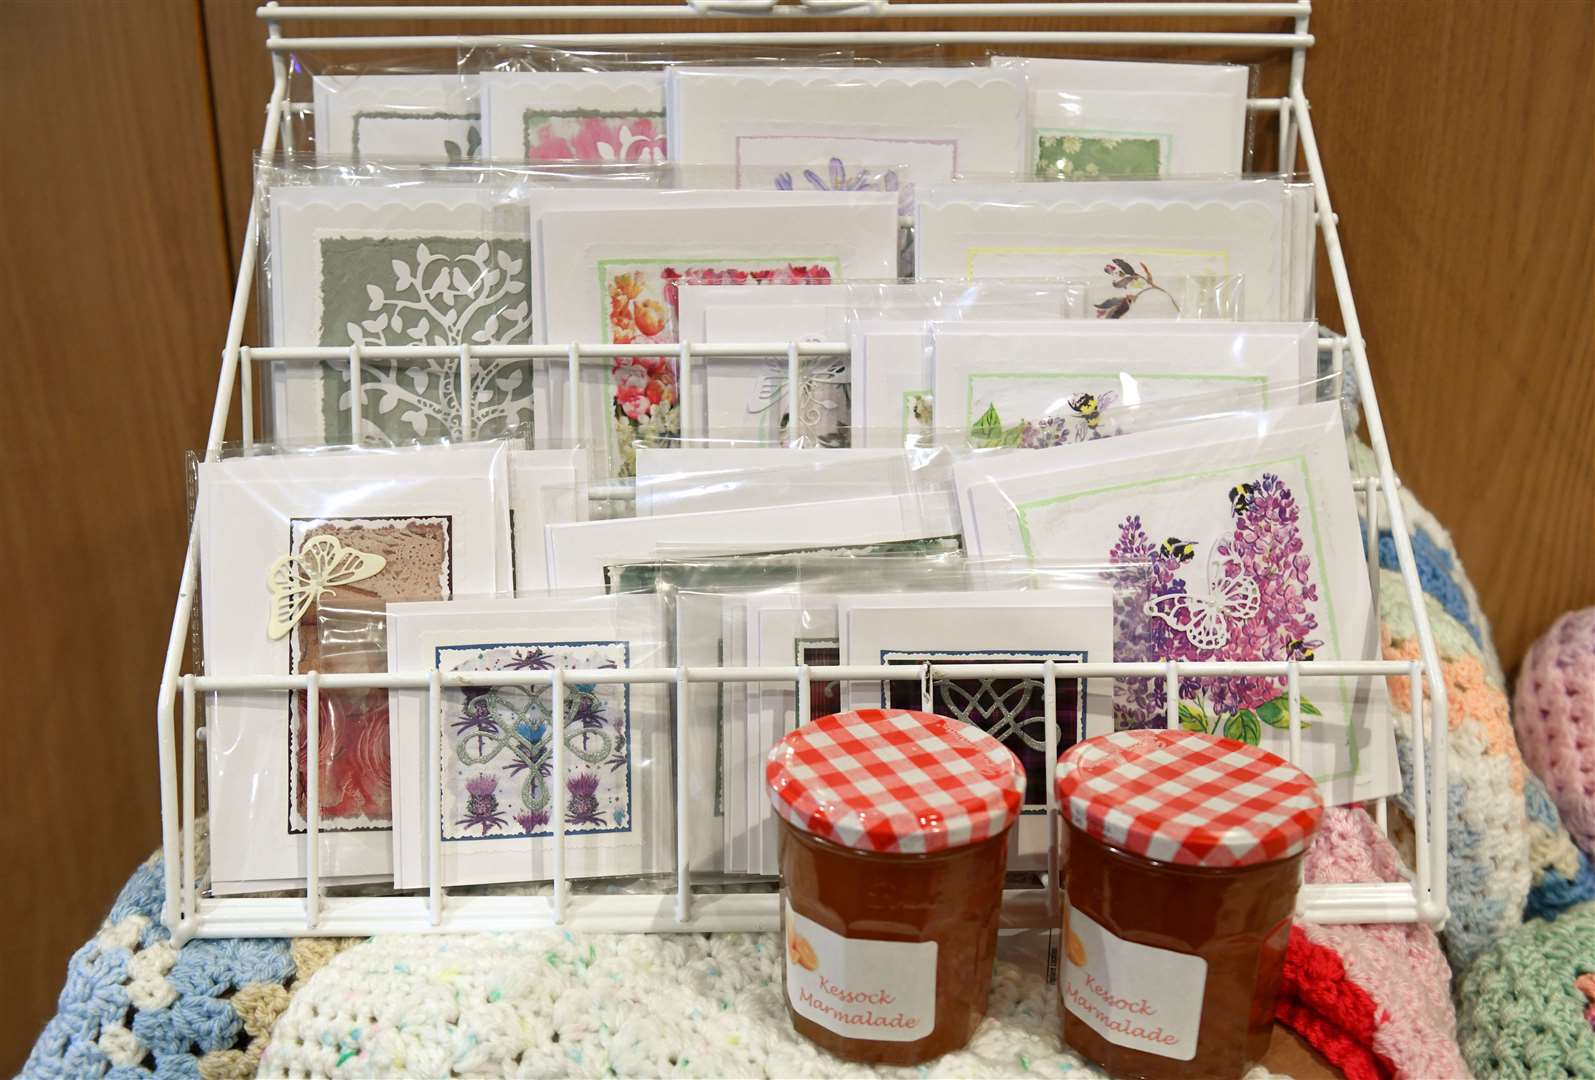 100 home made cards and 2 of the 100 pots of home made marmalade. Picture: James Mackenzie